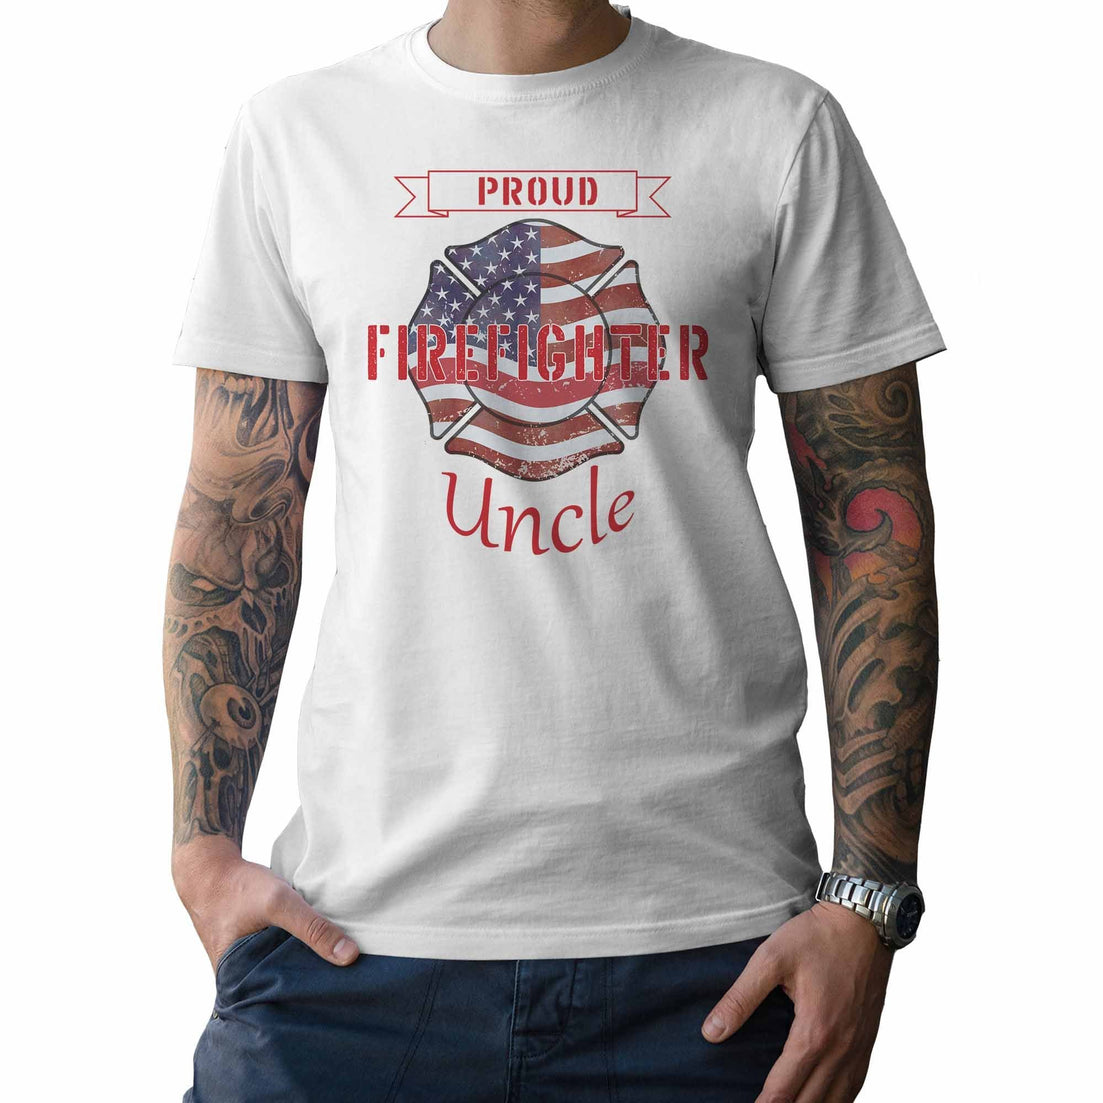 Proud Firefighter Uncle - My Custom Tee Party